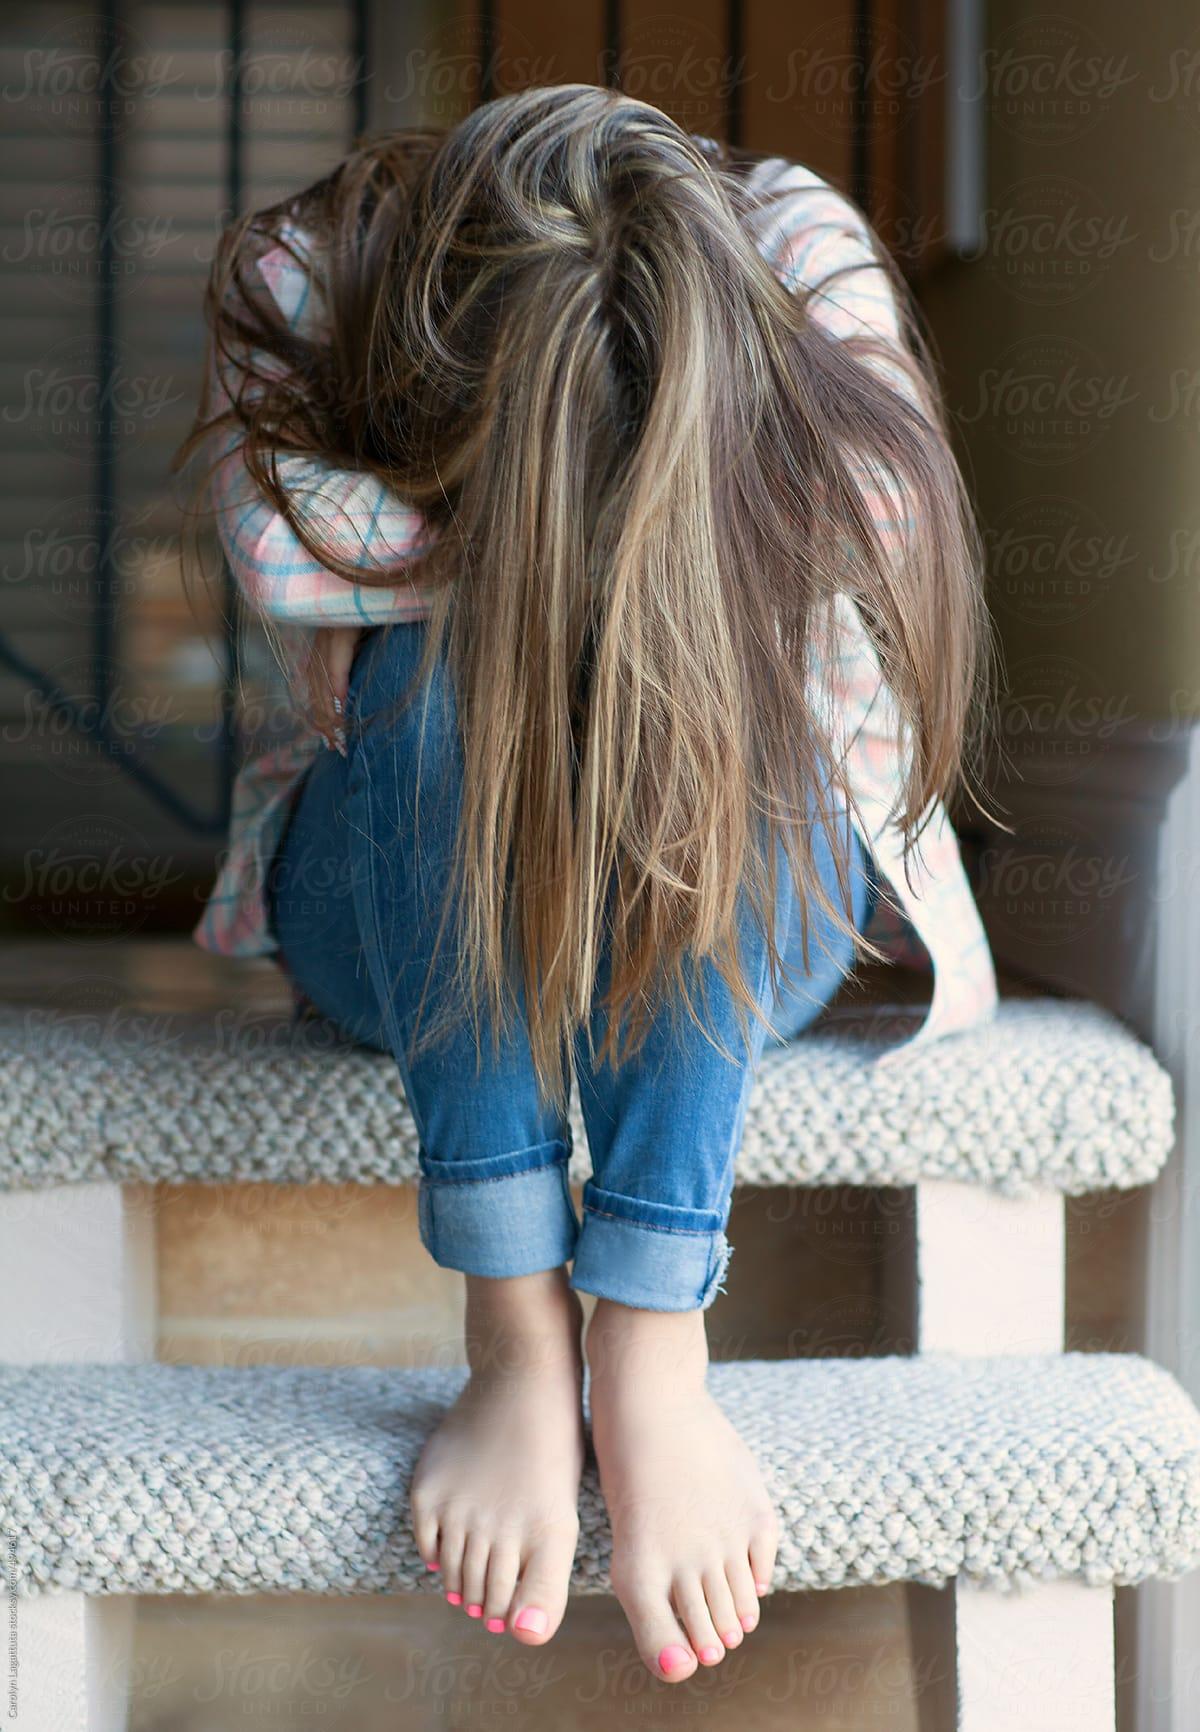 Teenage Girl With Long Hair Down Hiding Her Face